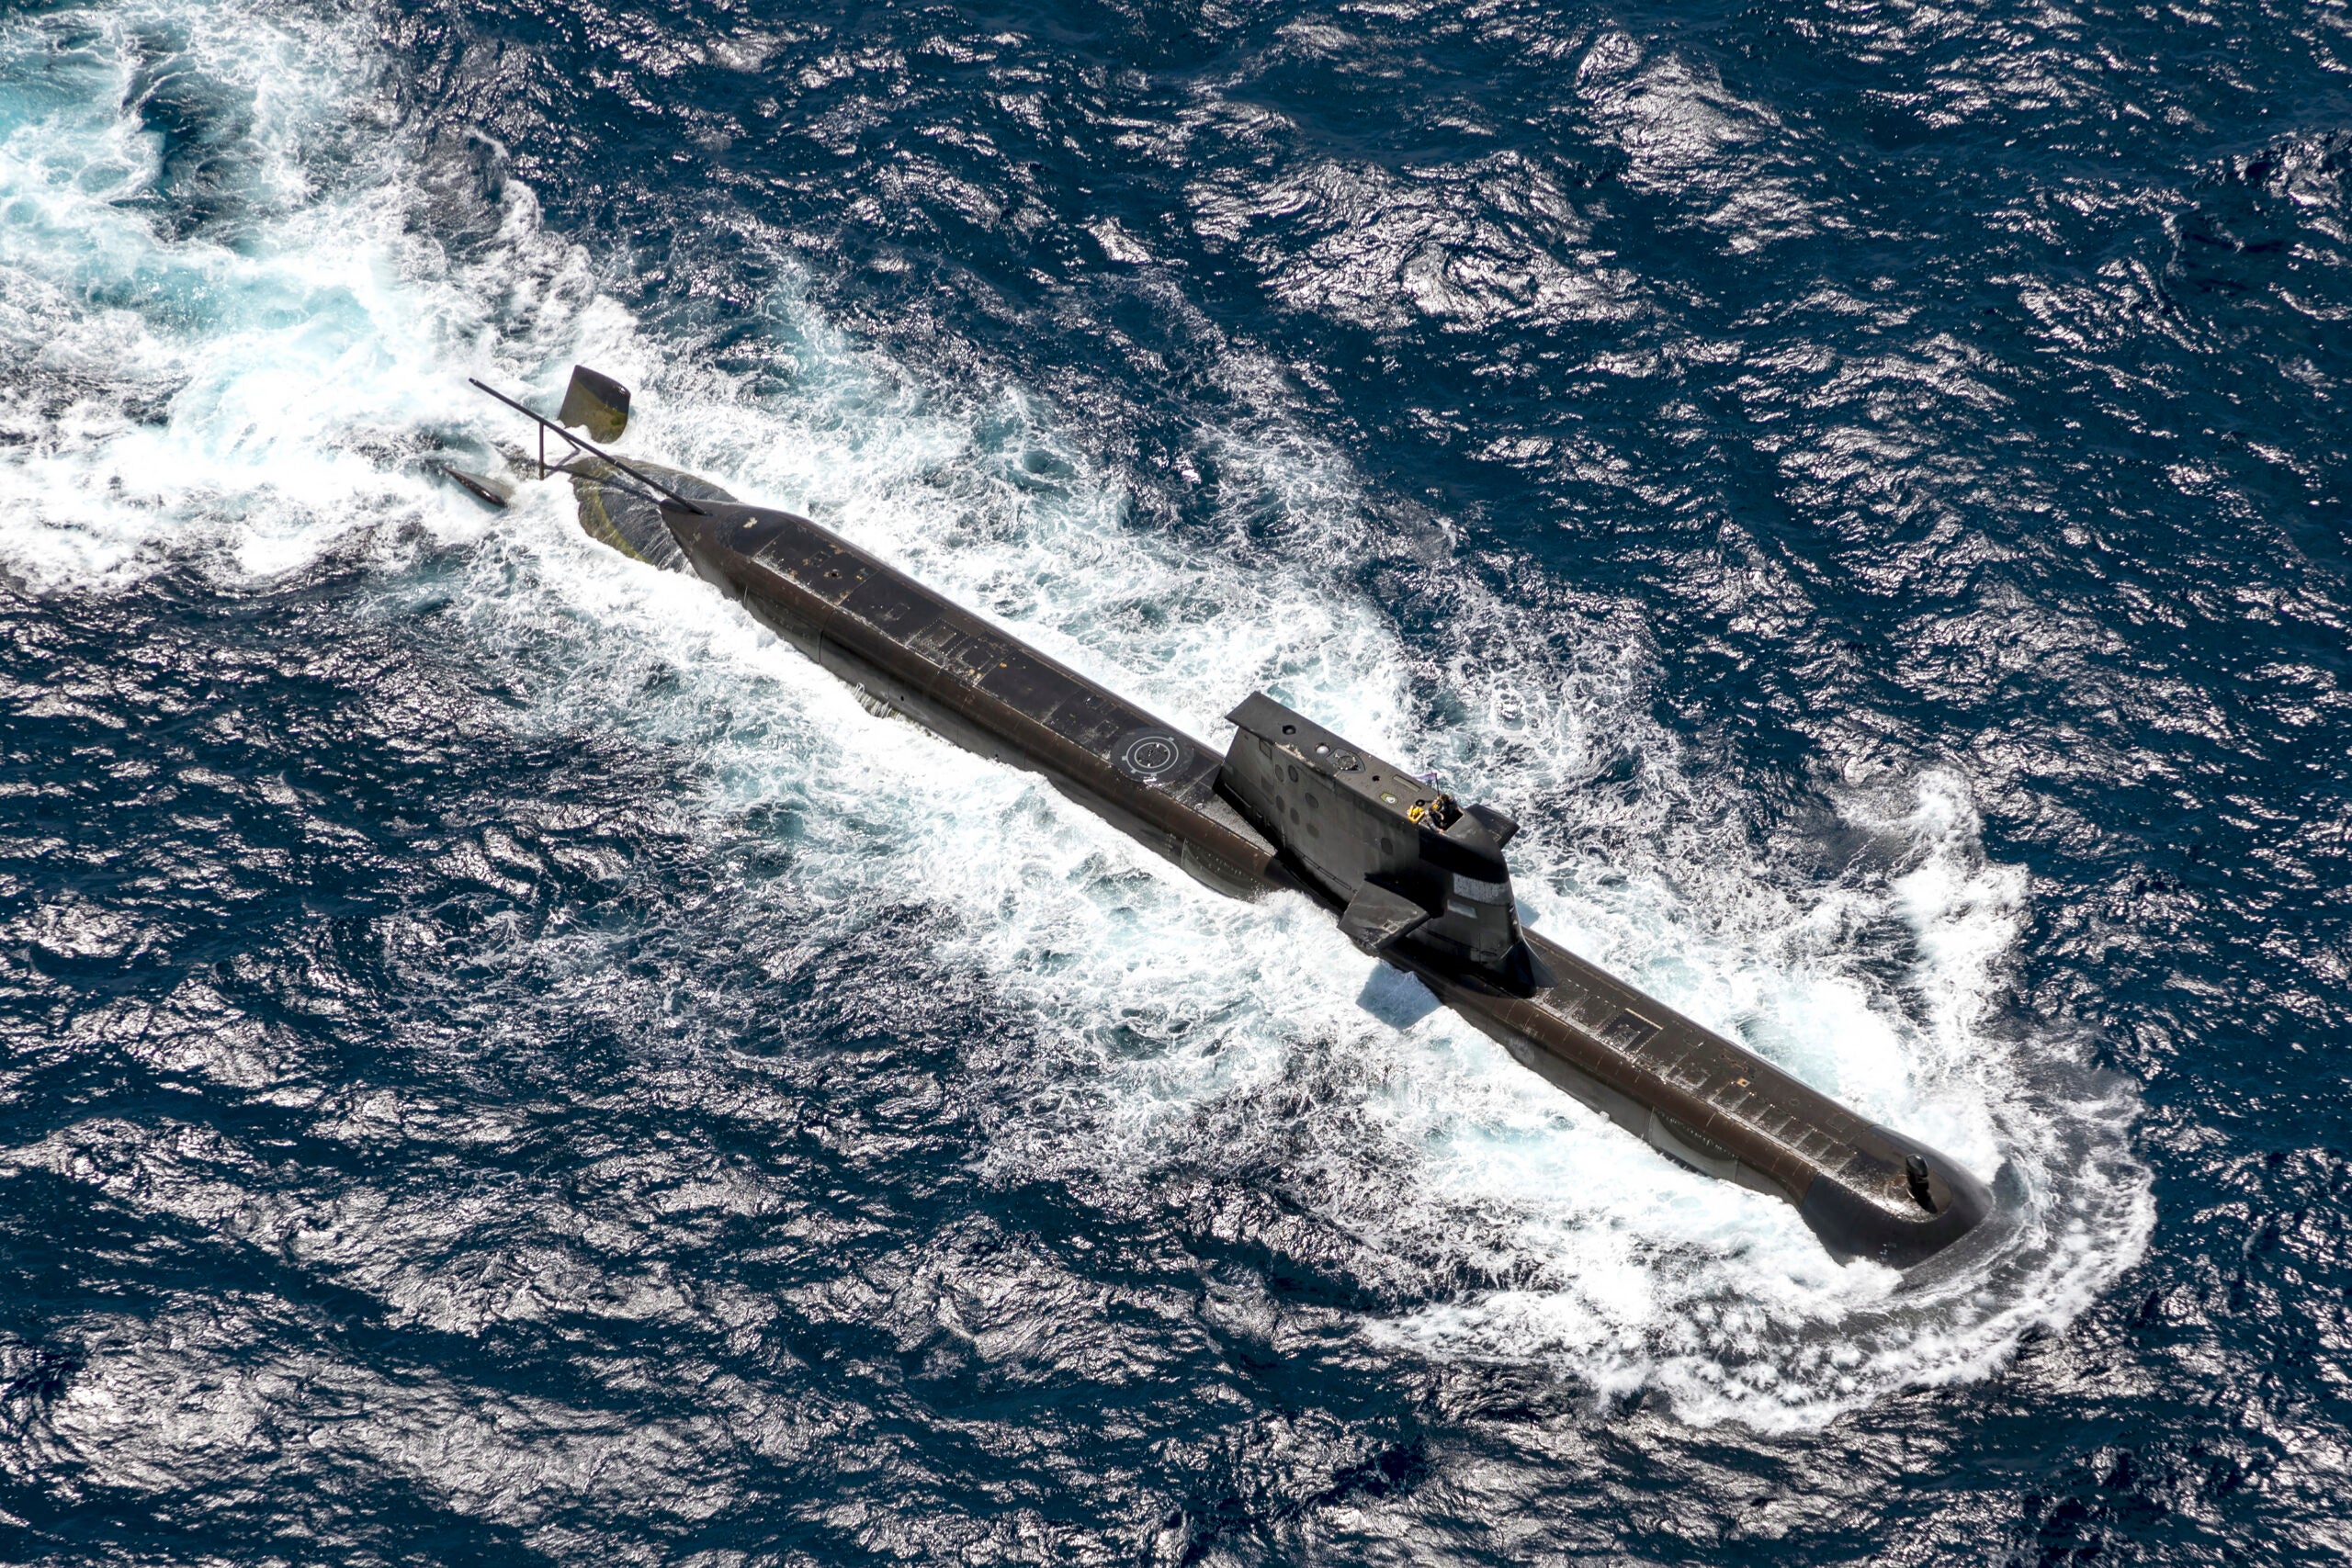 DARWIN, AUSTRALIA - SEPTEMBER 05: In this handout image provided by the Australian Defence Force, Royal Australian Navy submarine HMAS Rankin is seen during AUSINDEX 21, a biennial maritime exercise between the Royal Australian Navy and the Indian Navy on September 5, 2021 in Darwin, Australia. Australia, the United States and the United Kingdom have announced a new strategic defence partnership - known as AUKUS - to build a class of nuclear-propelled submarines and work together in the Indo-Pacific region. The new submarines will replace the Royal Australian Navy's existing Collins submarine fleet. (Photo by POIS Yuri Ramsey/Australian Defence Force via Getty Images)